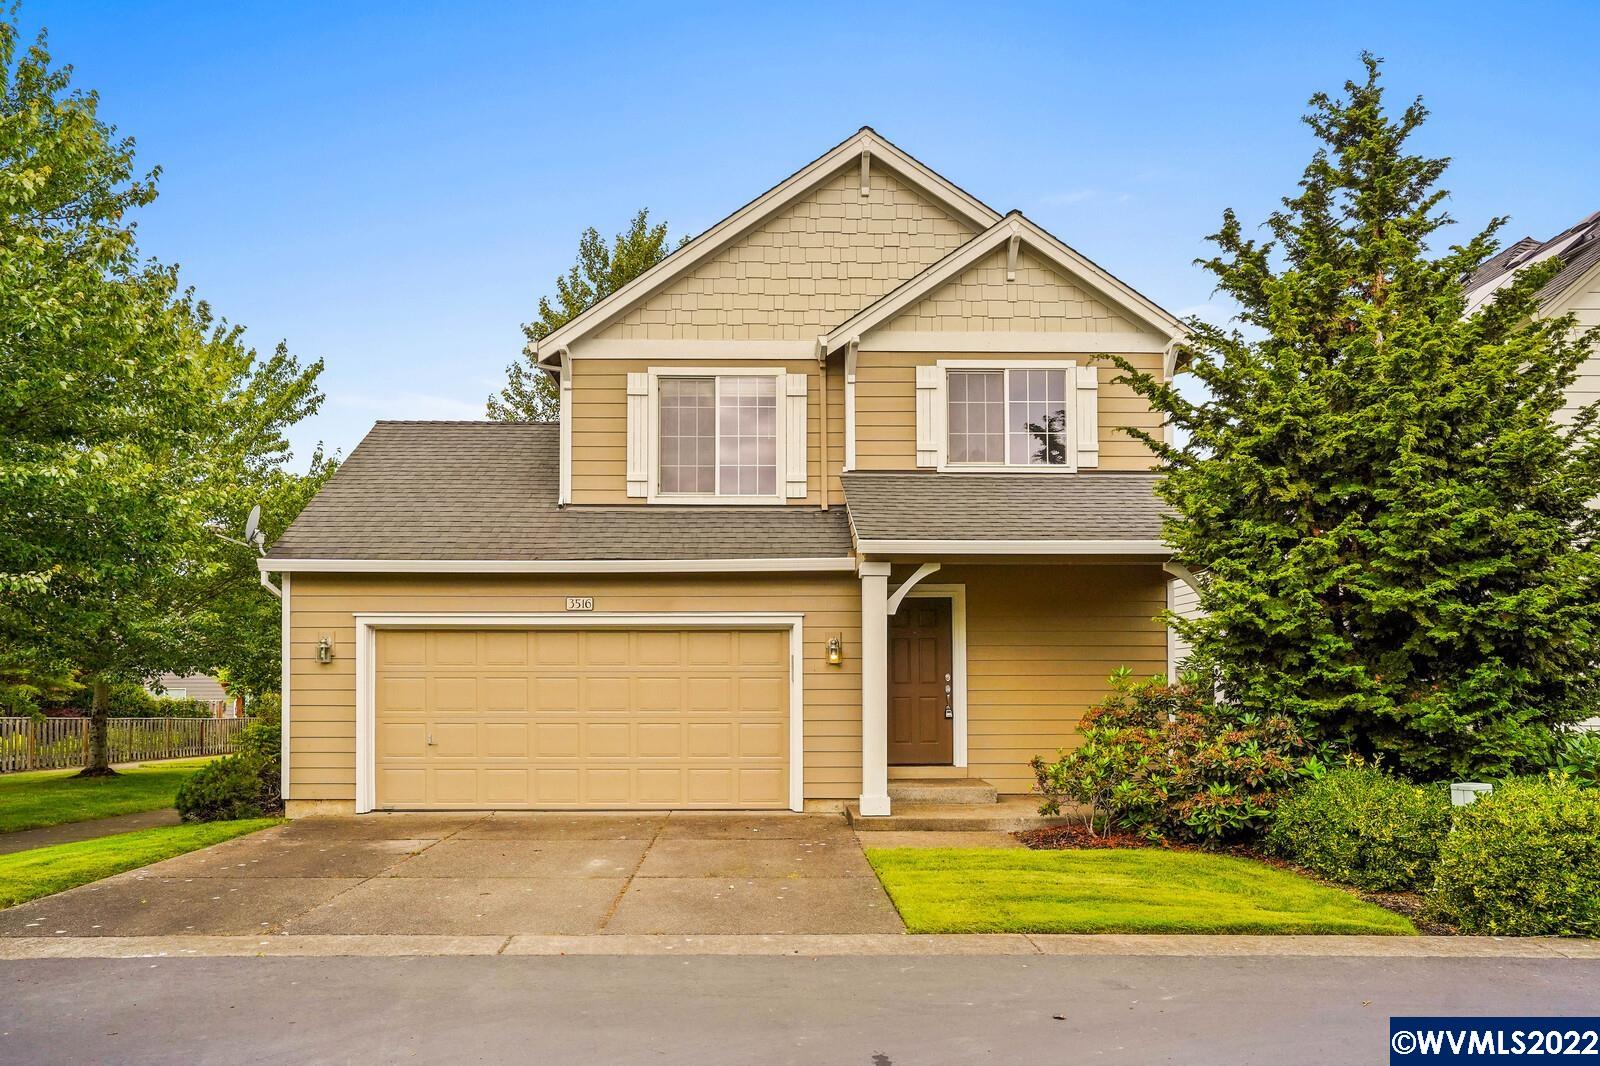 Awesome opportunity in coveted Willamette Landing. This gem features an open concept floorplan on the main, perfect for everyday living & entertaining with a slider from the dining leading to an outdoor patio perfect for summer BBQs, and an easy low maintanece yard. 3 bedrooms up, including primary suite...and washer/dryer upstairs too! HOA includes pool (perfect timing to enjoy this summer!), club house & front landscaping. New exterior paint 2021.